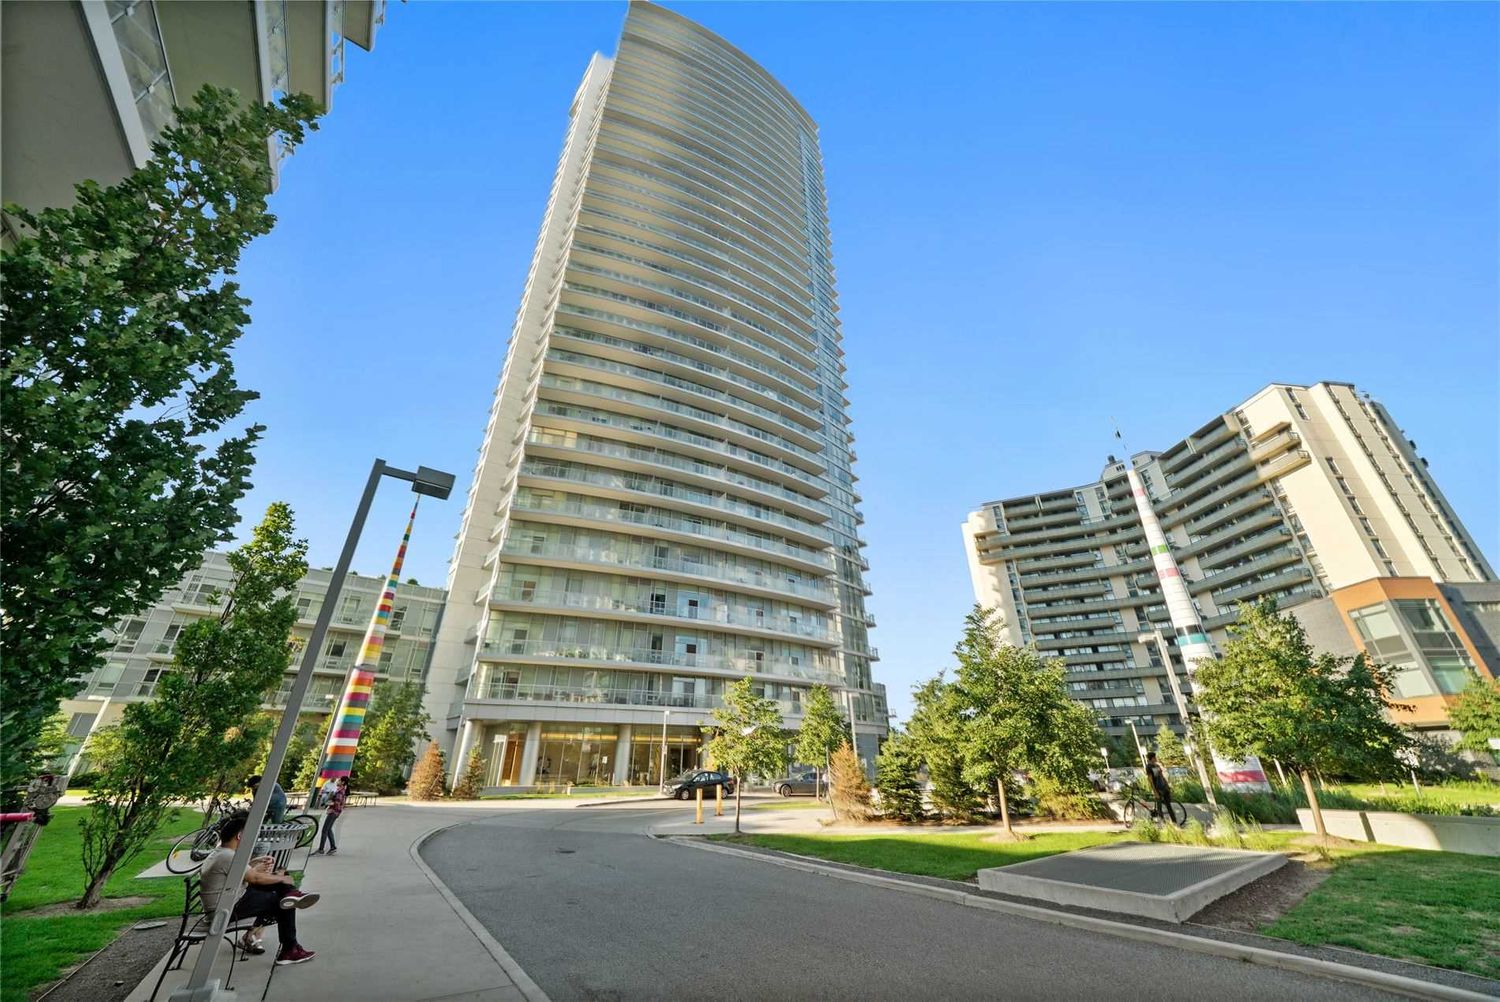 70 Forest Manor Road. Emerald City I Condos is located in  North York, Toronto - image #2 of 2